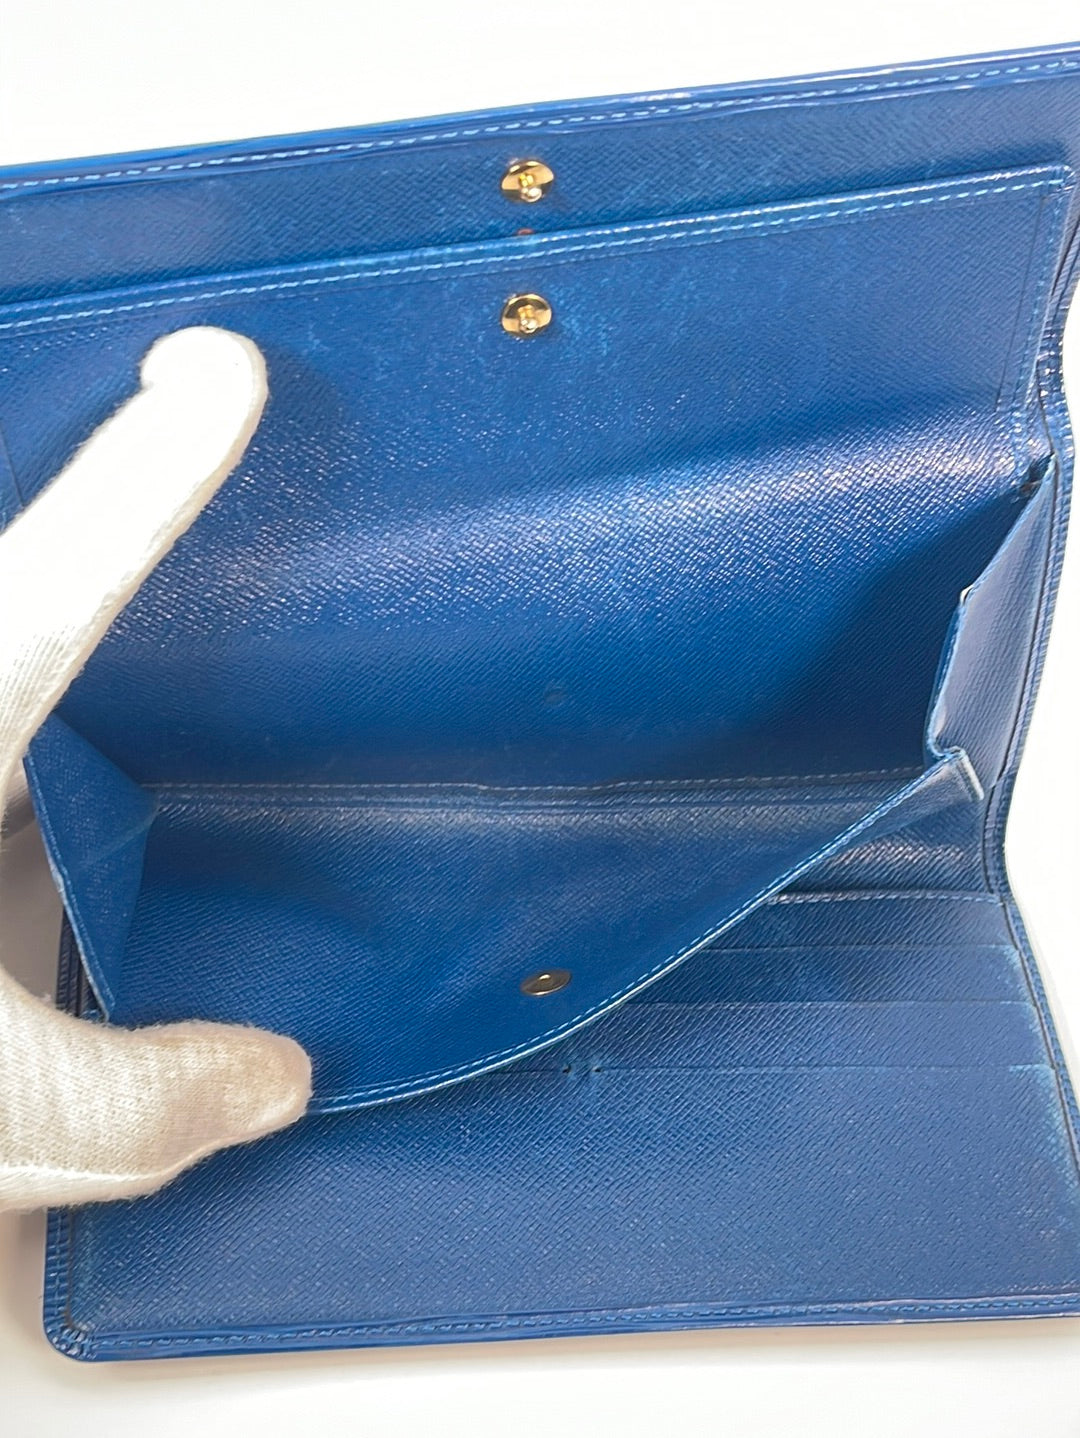 Louis Vuitton - Authentic Blue Epi Leather Wallet - Used Once. Excellent  Condition - $401 (38% Off Retail) - From Julie